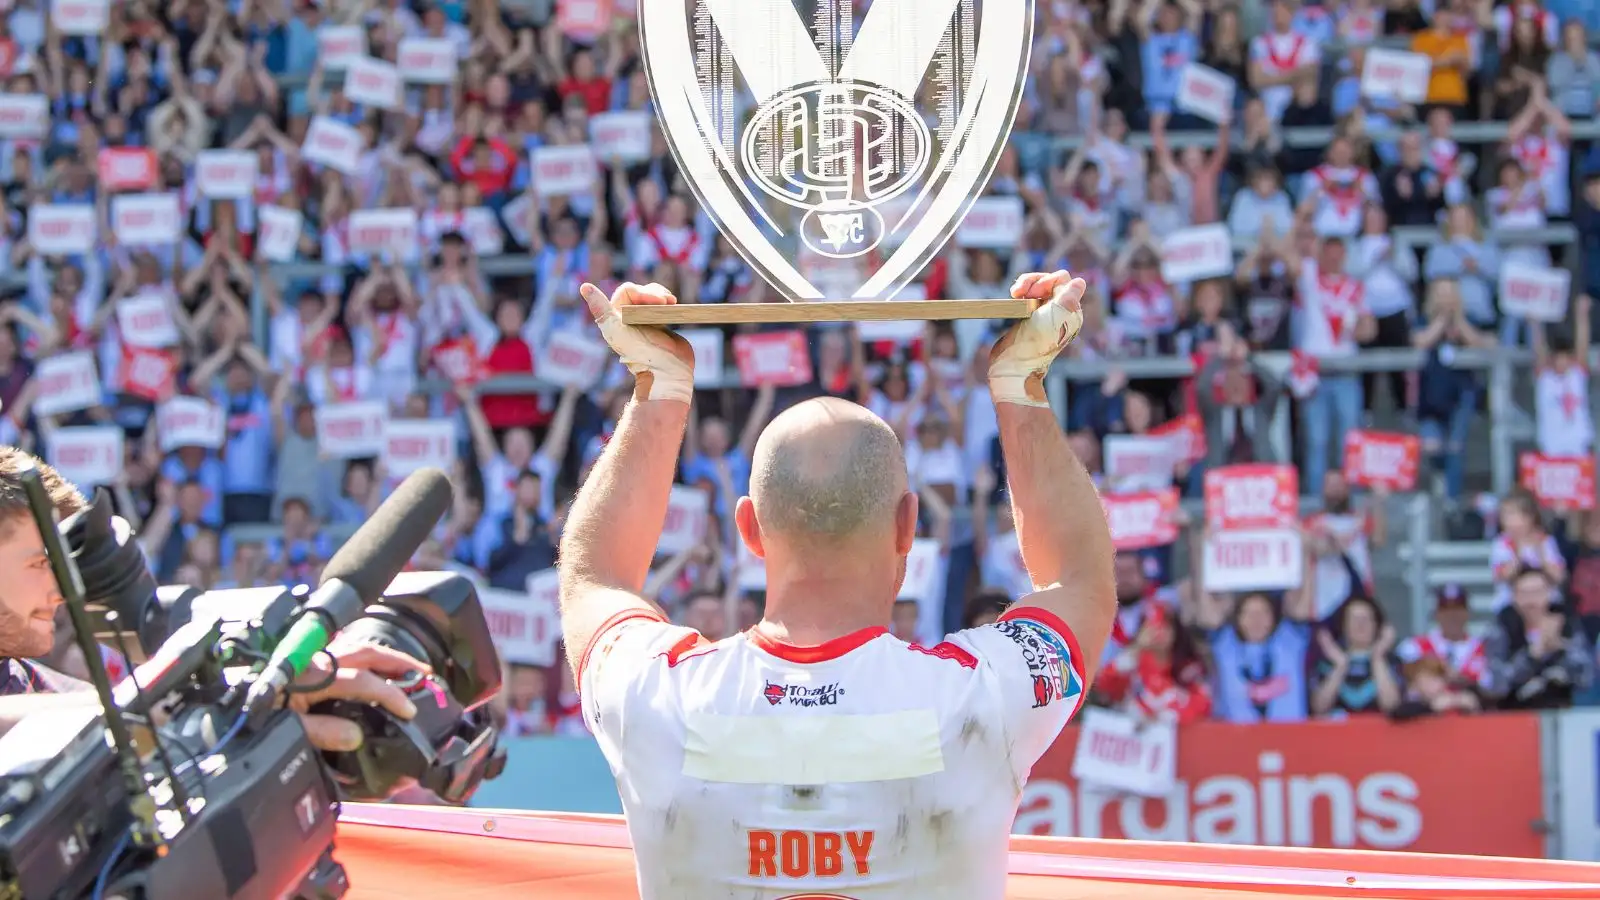 Paul Wellens pays tribute to hometown hero James Roby following record appearance